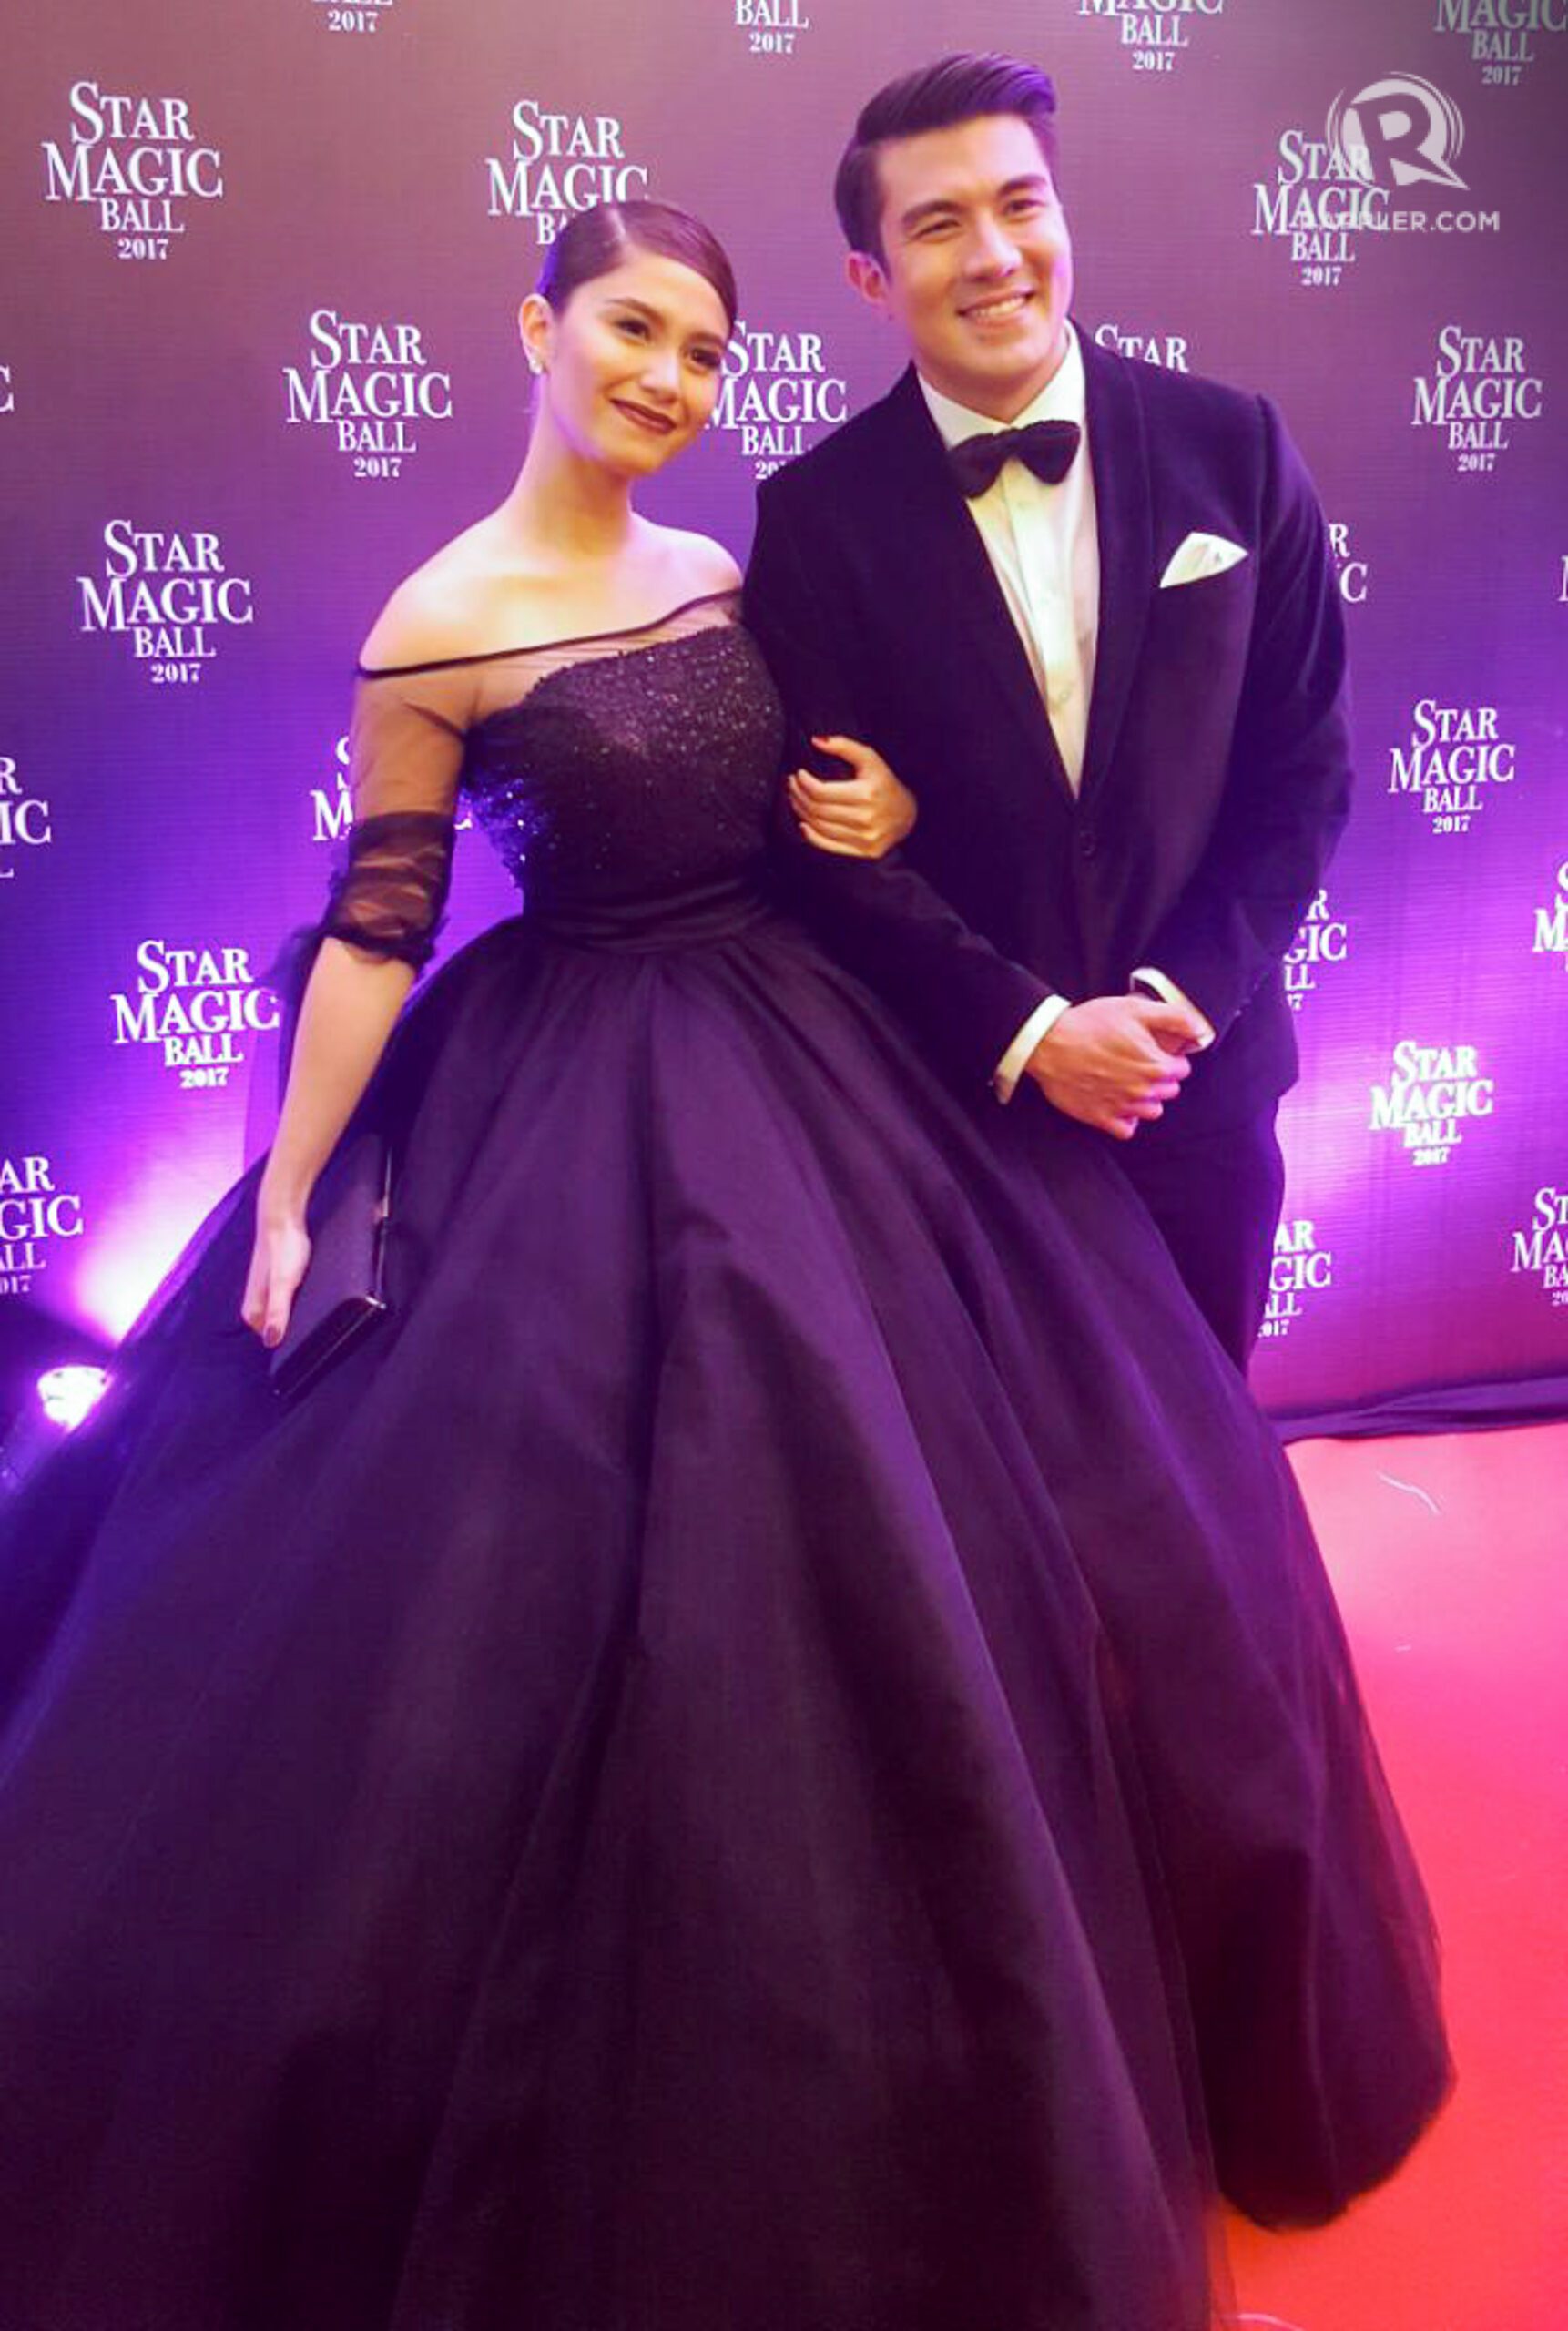 Star Magic Ball 2017: Jessy and Luis win Couple of the Night